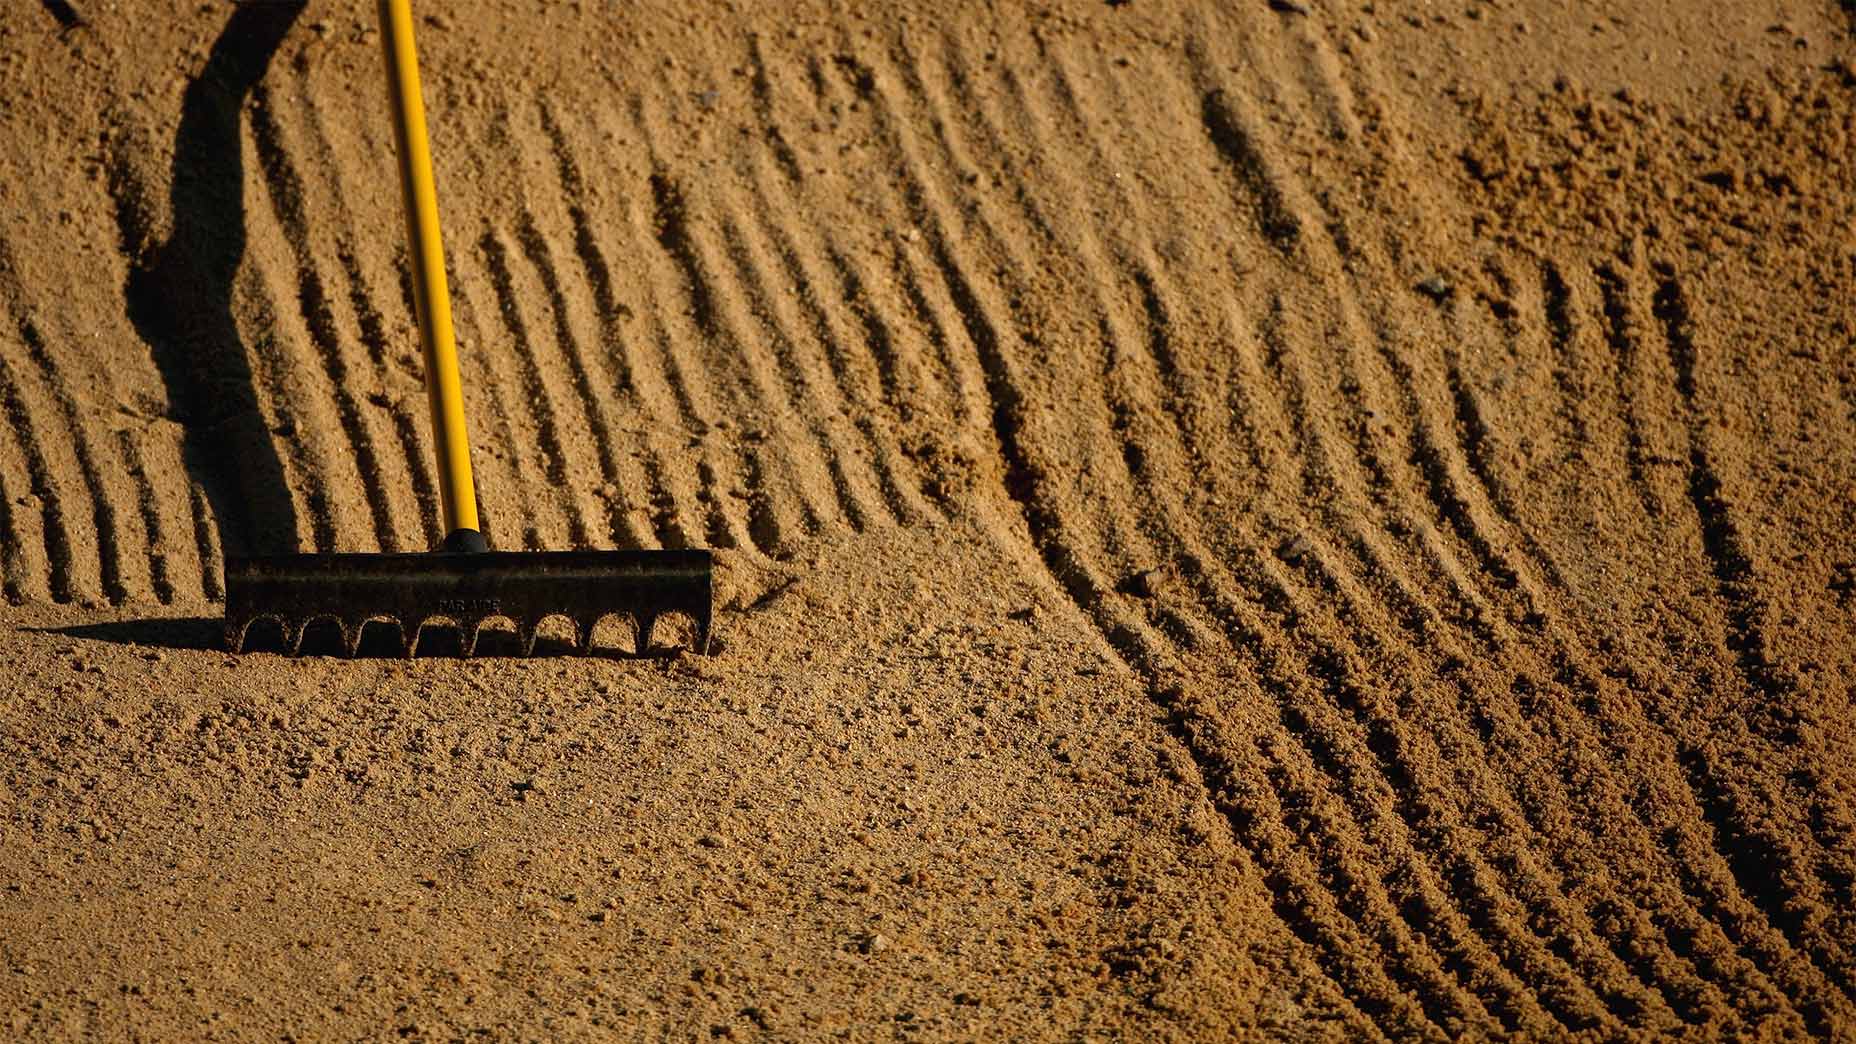 Is it time to officially get rid of bunker rakes? The answer is